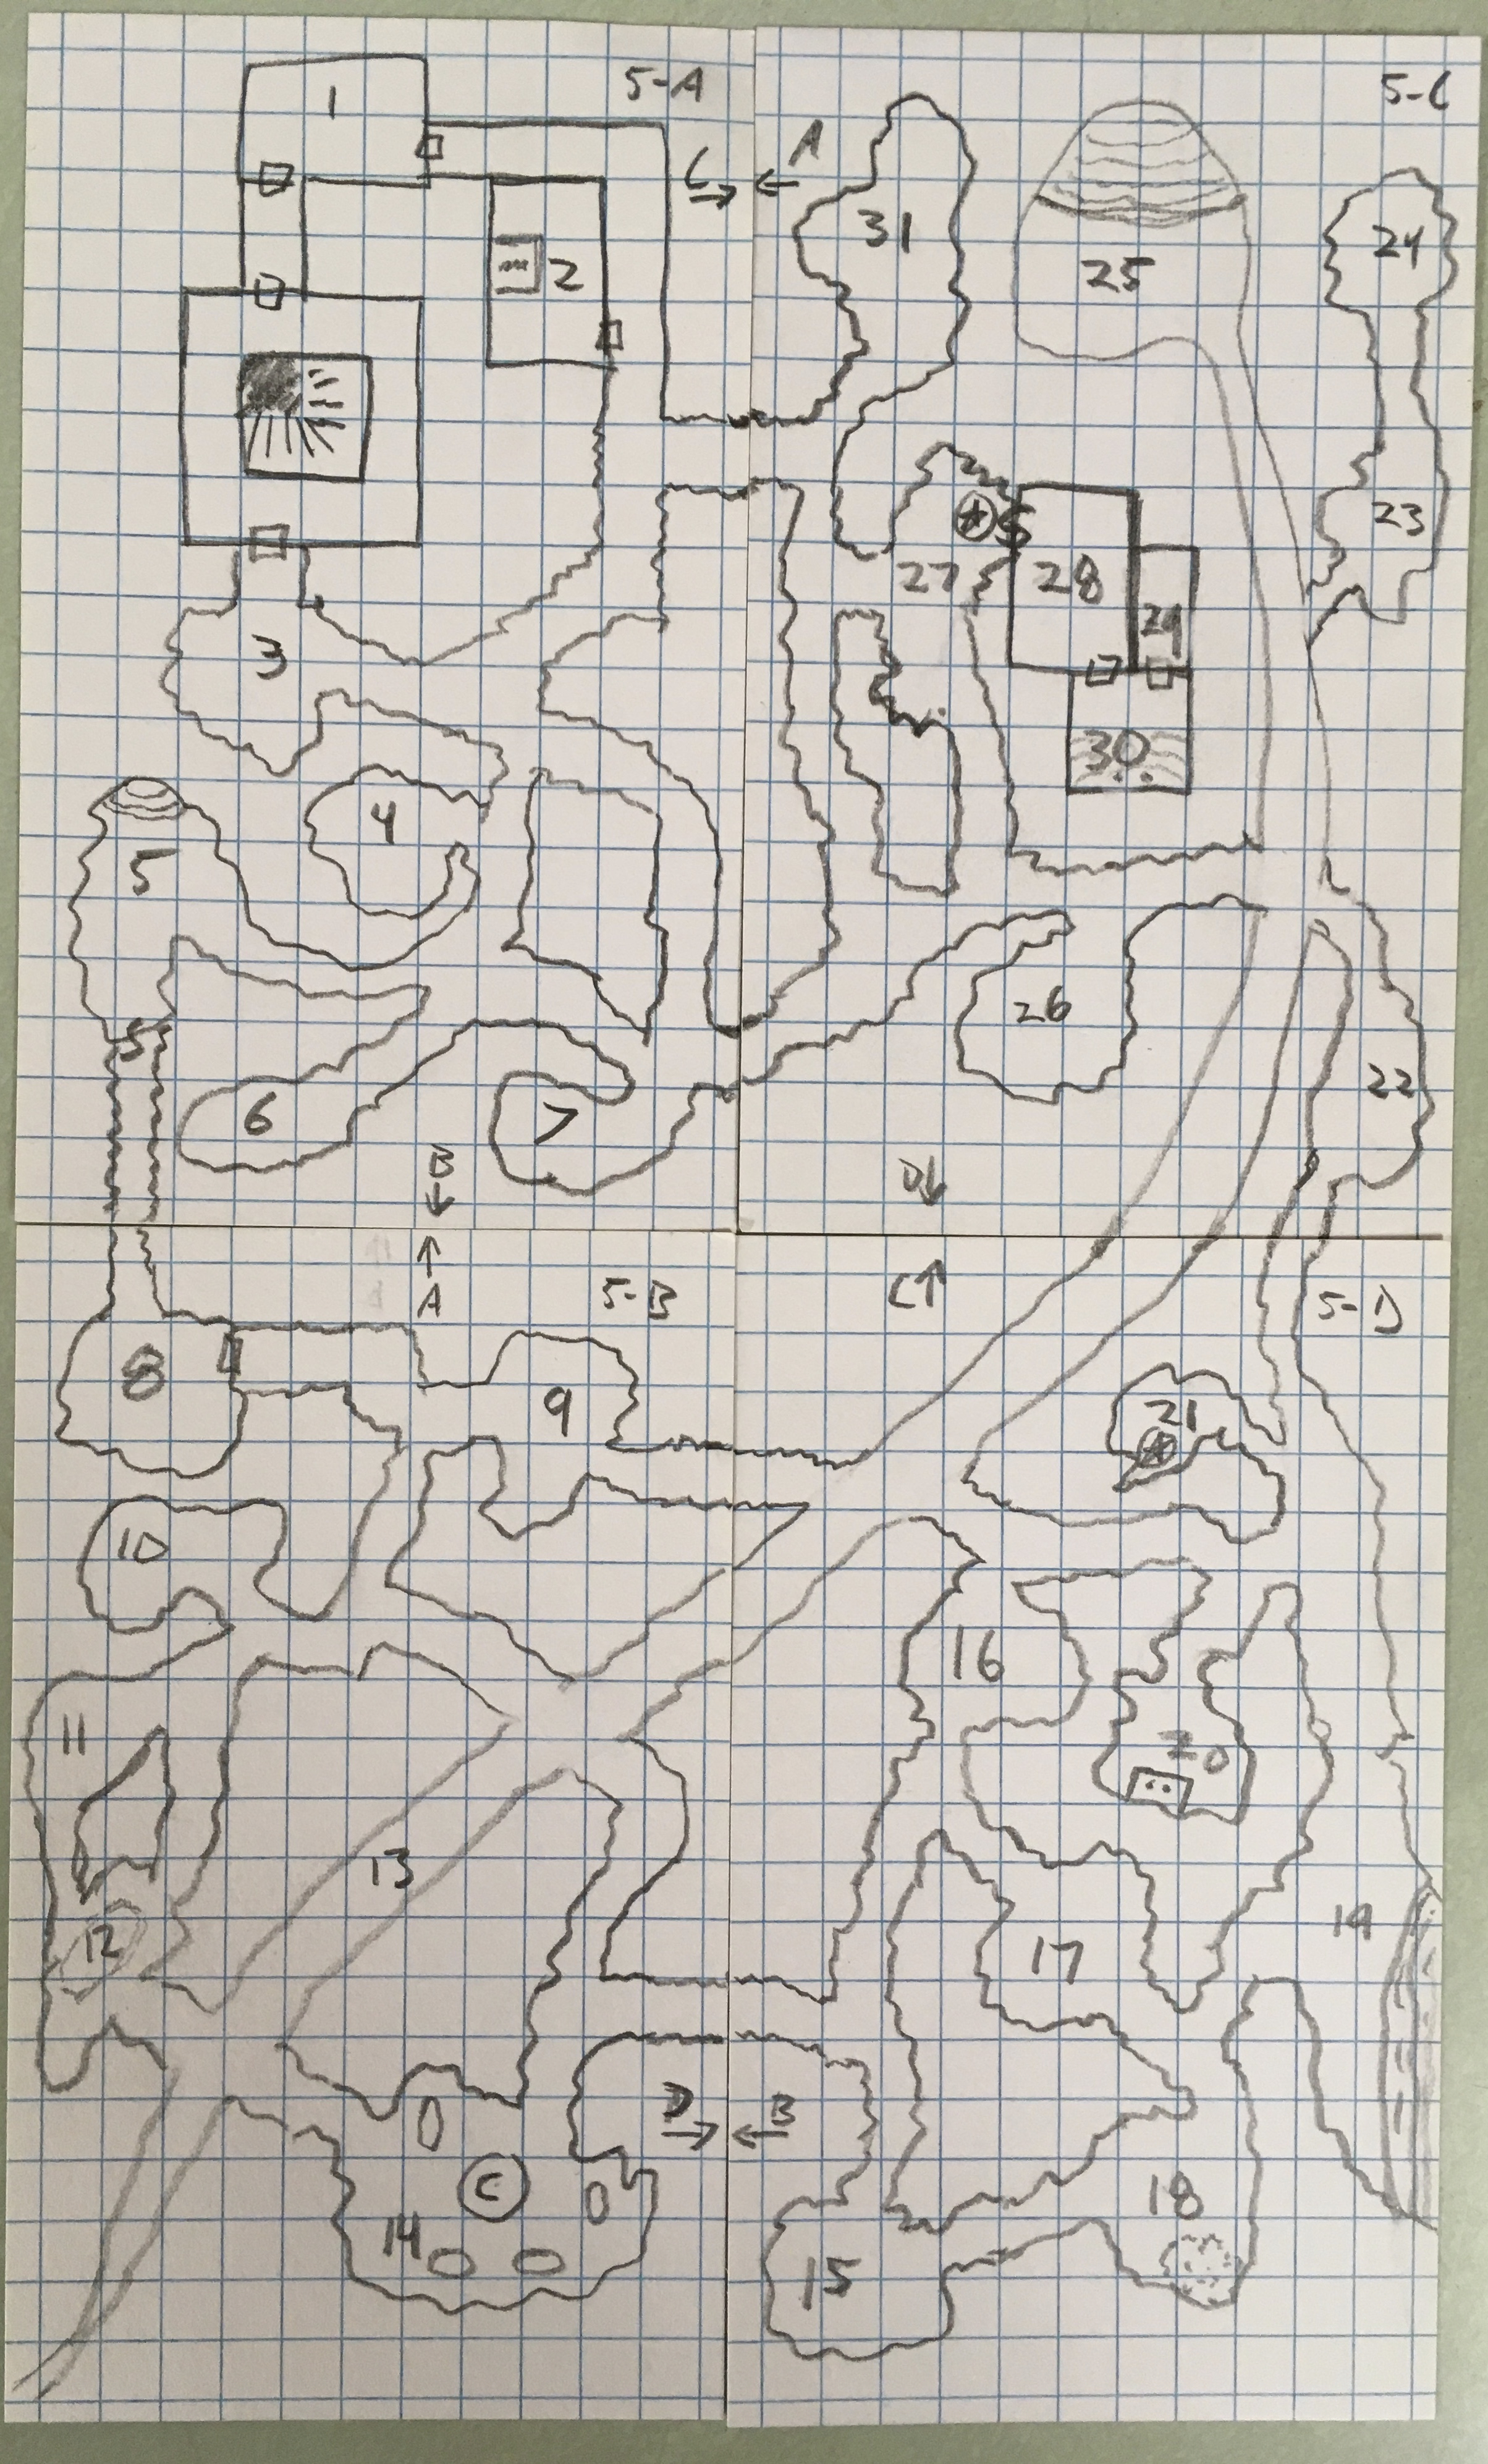 Complete Map of Level 5